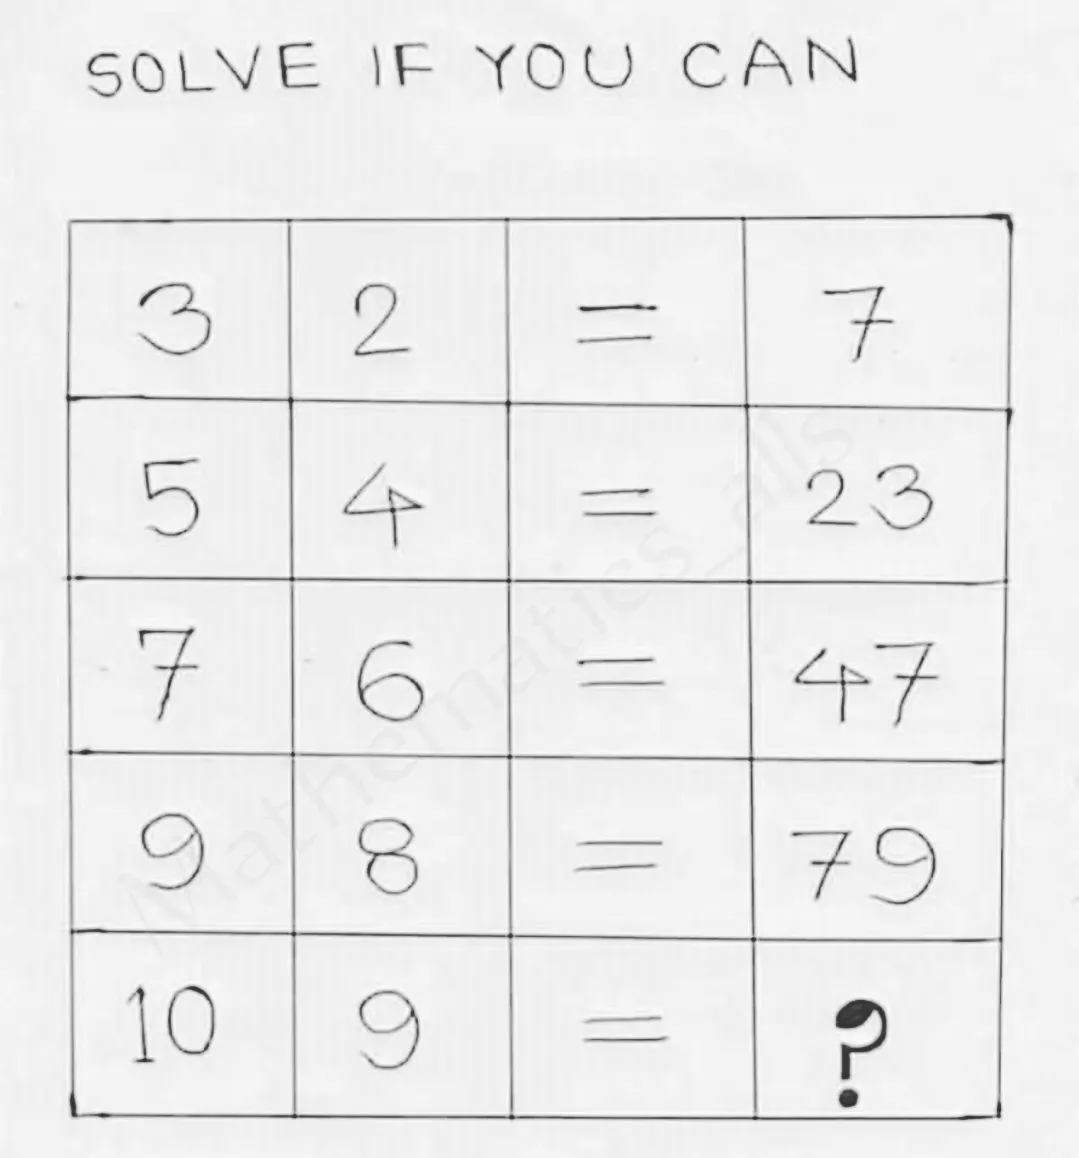 solve if you can challenge accepted 